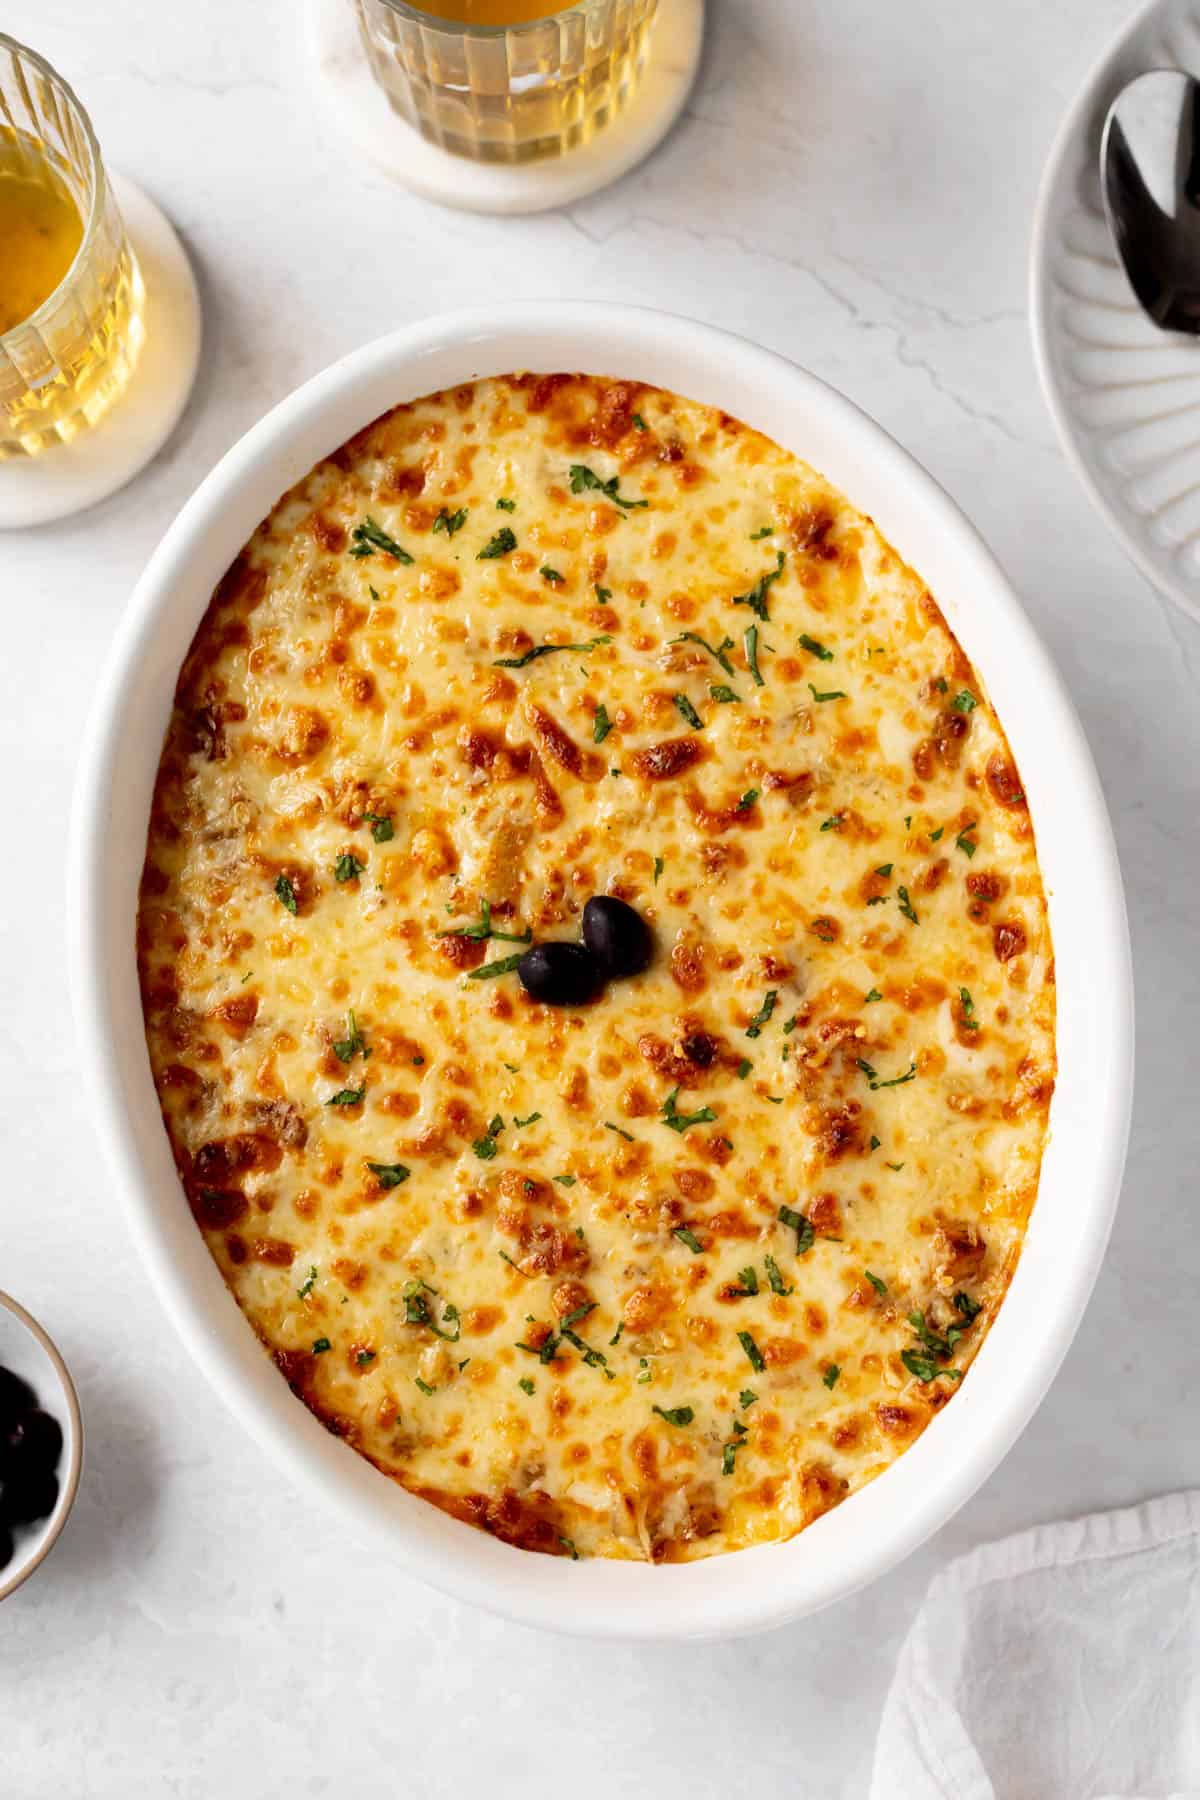 bacalhau com natas in a casserole dish with melted cheese on top and garnished with 2 black olives and chopped parsley.